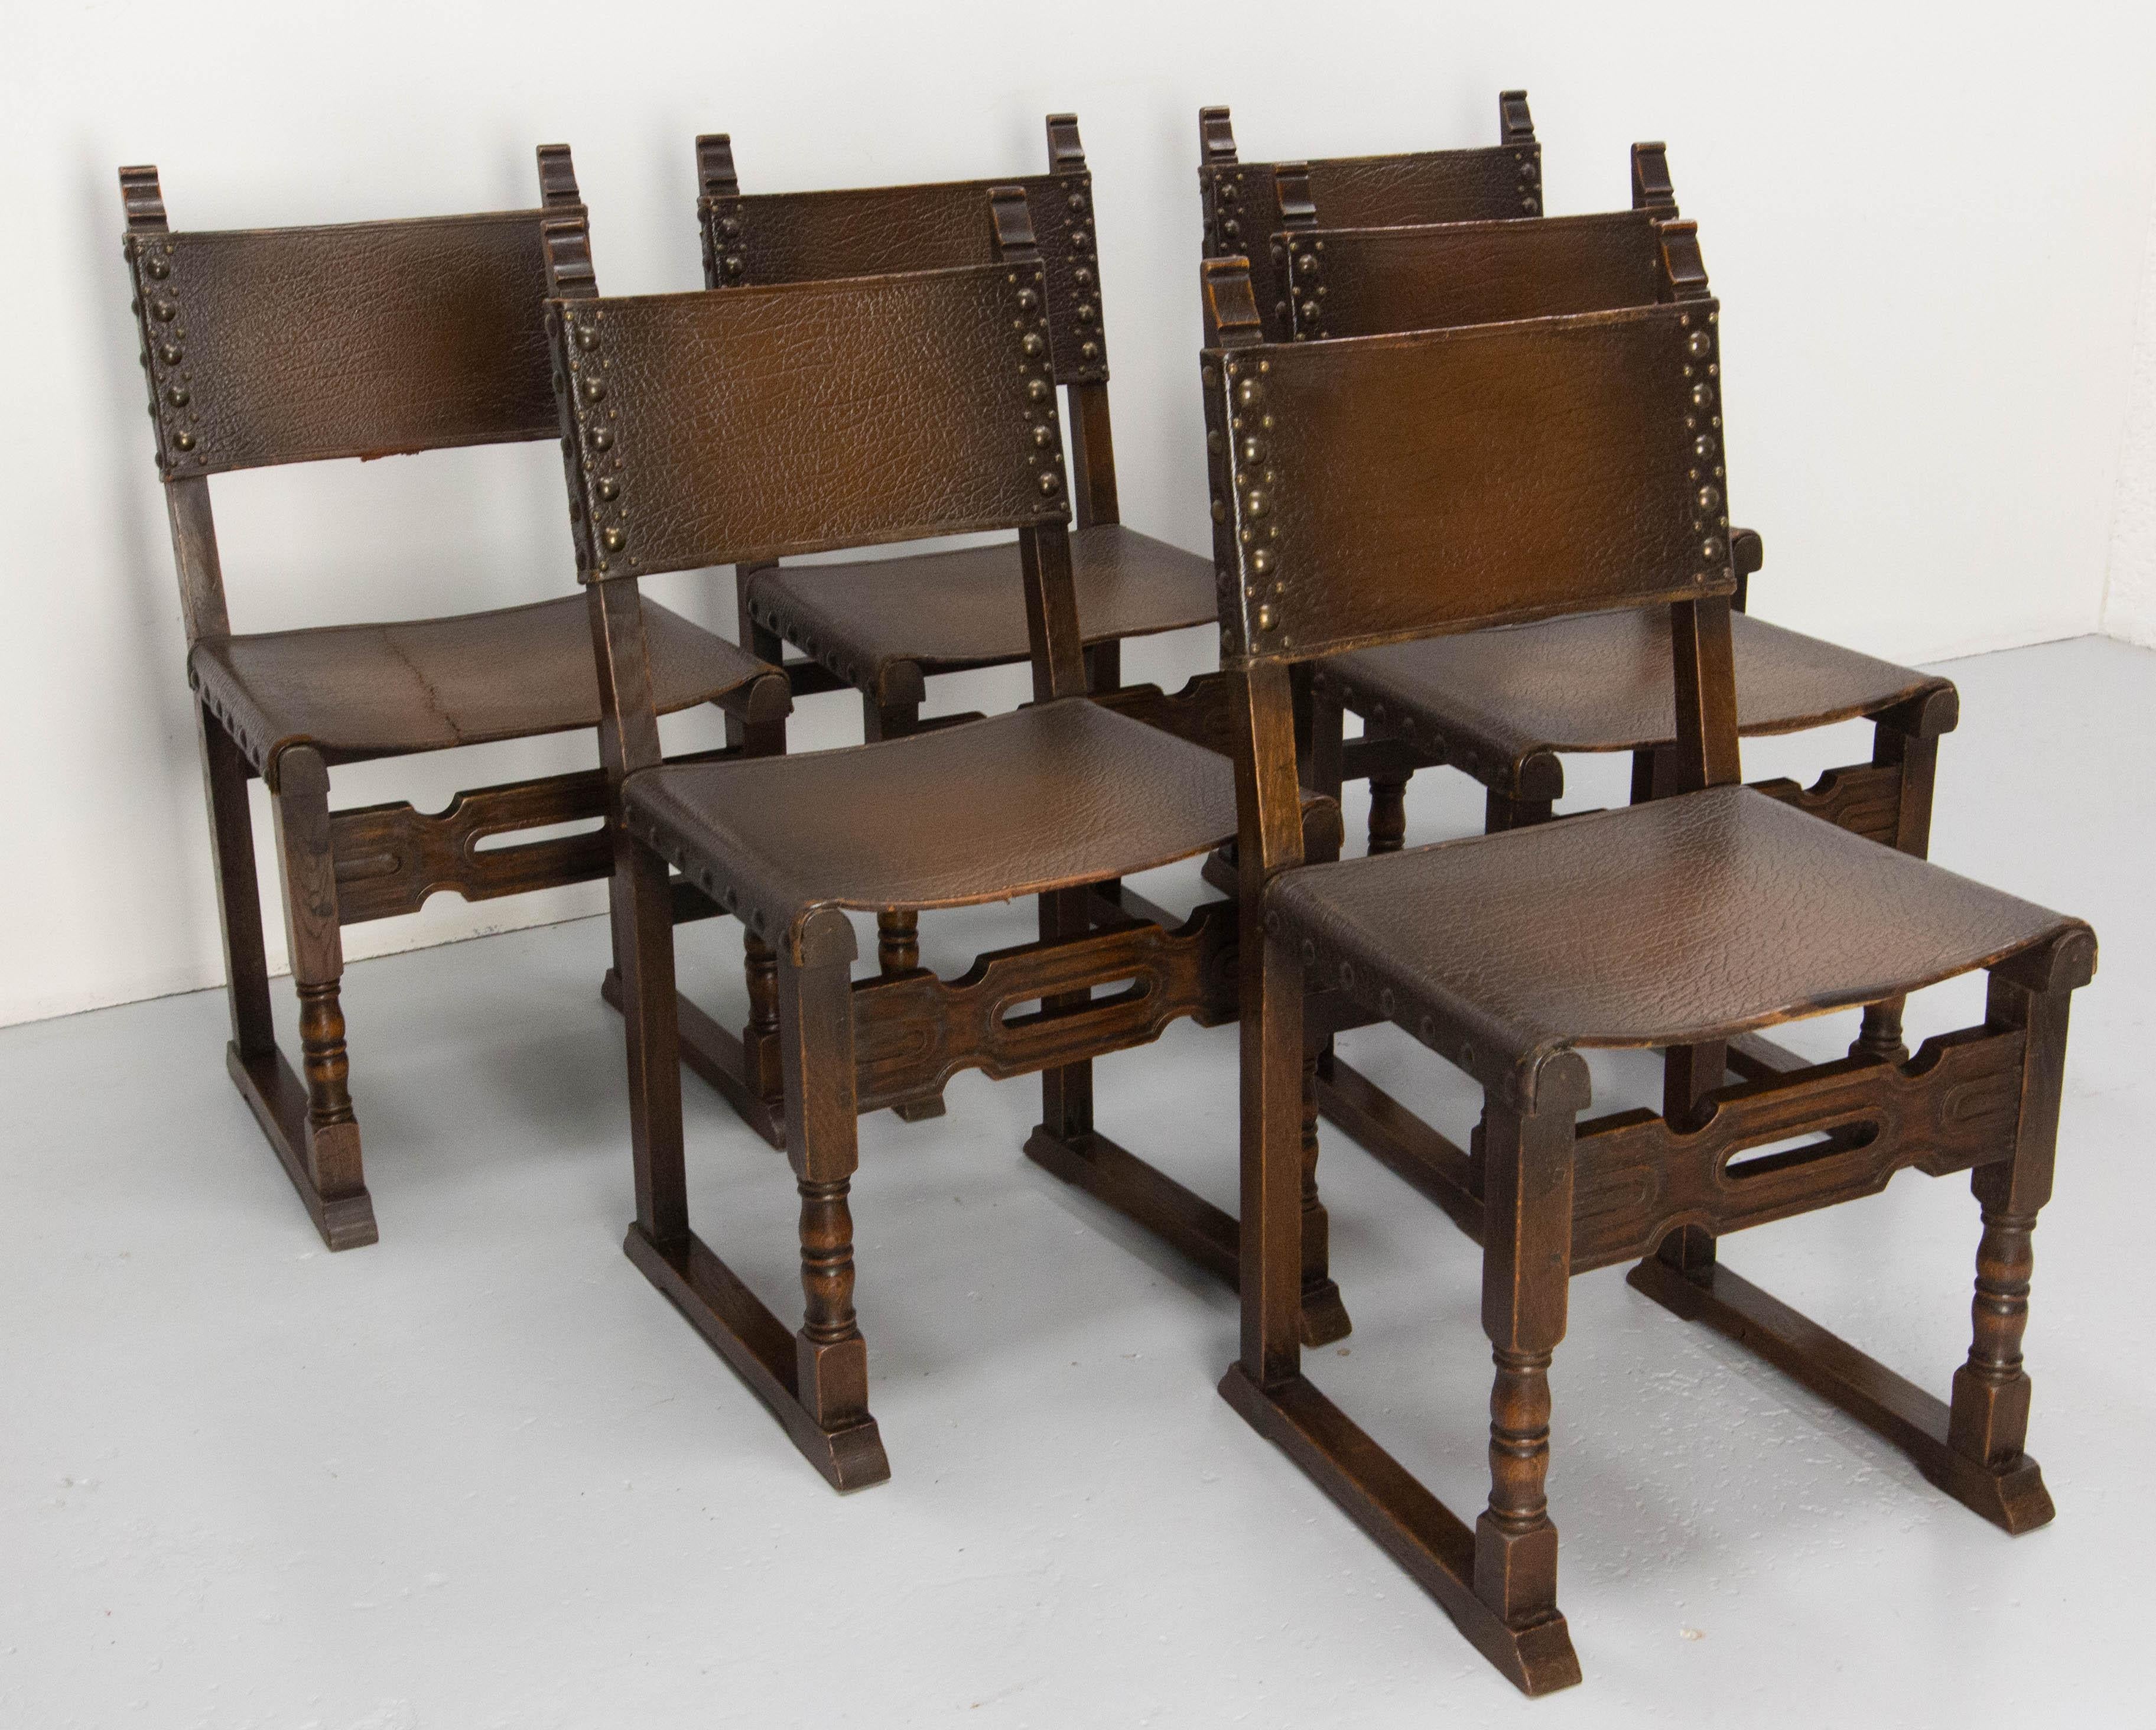 Handsome set of six chairs
Chestnut, leather and iron studs.
The leather seats are all reinforced with upholsterer's straps. The leather covering one of the chairs was torn, so straps were added underneath the seat and a seam was sewn for purely